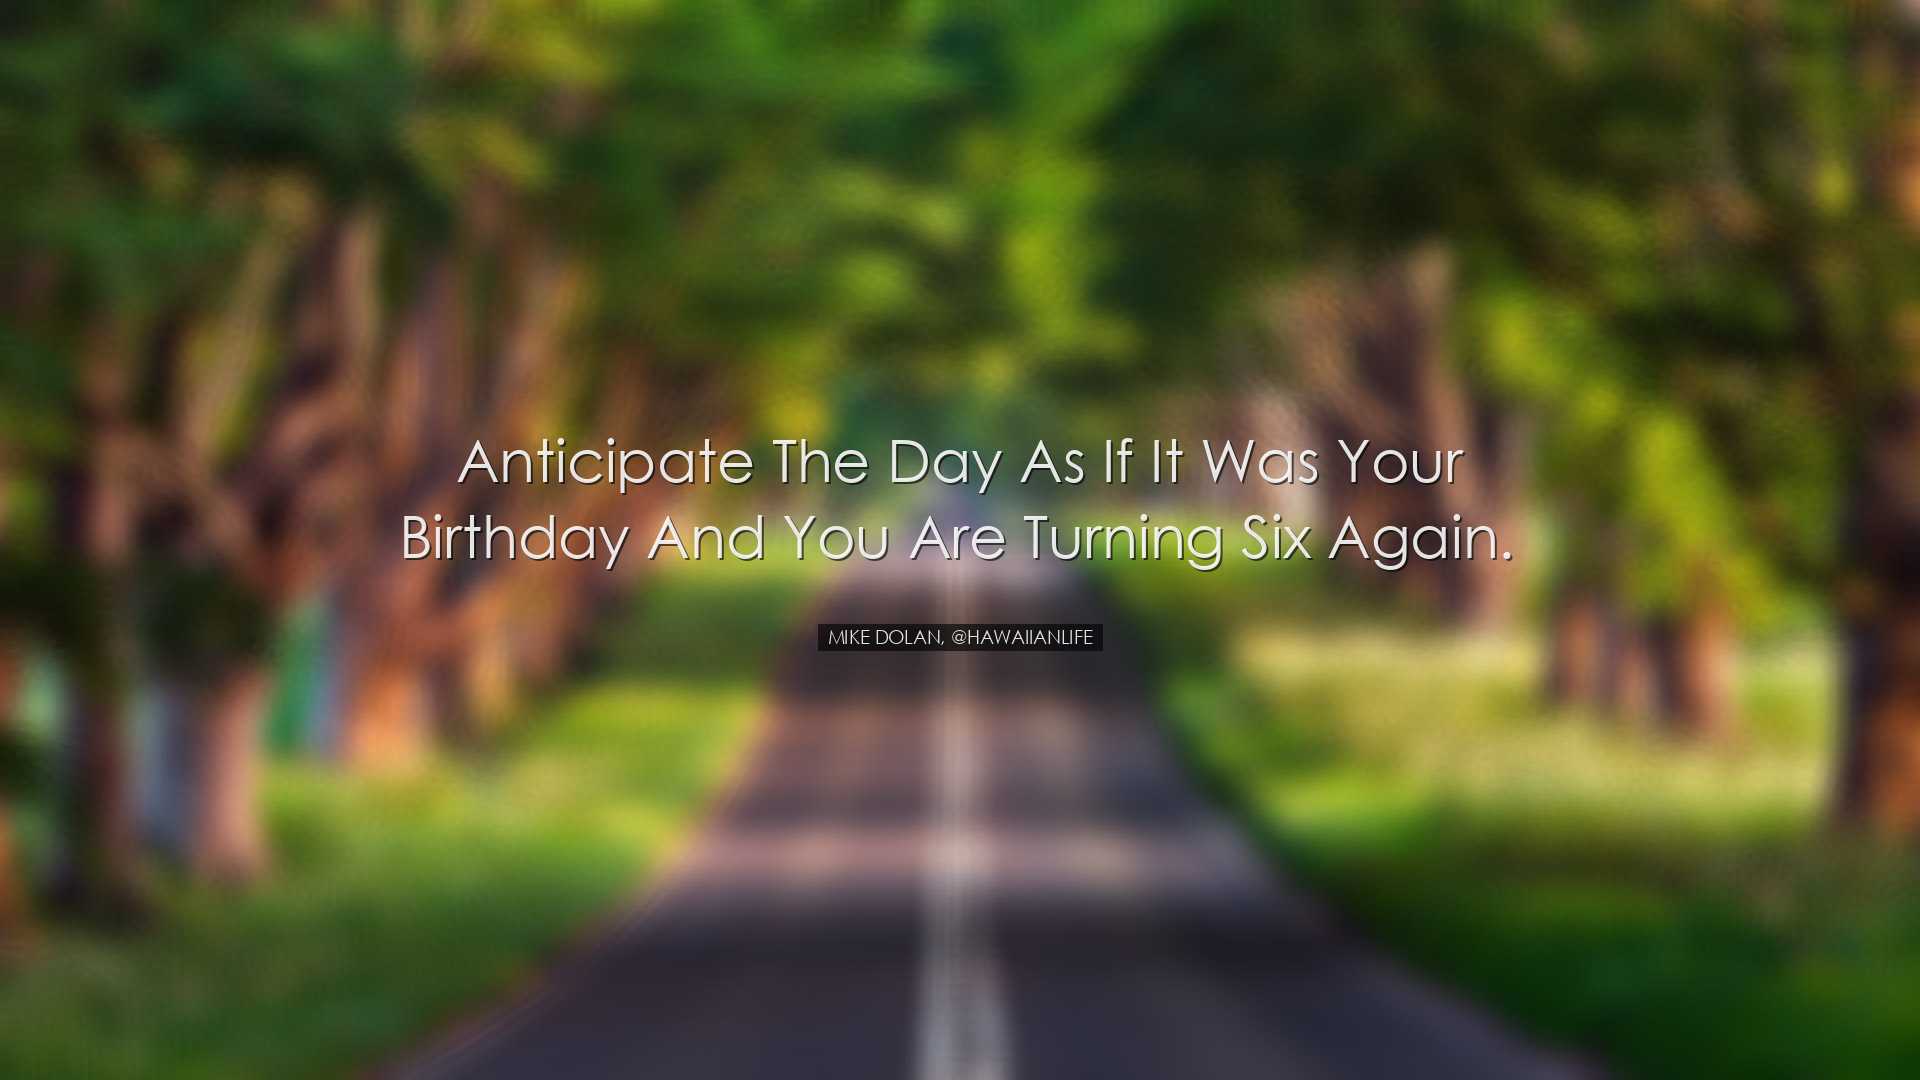 Anticipate the day as if it was your birthday and you are turning